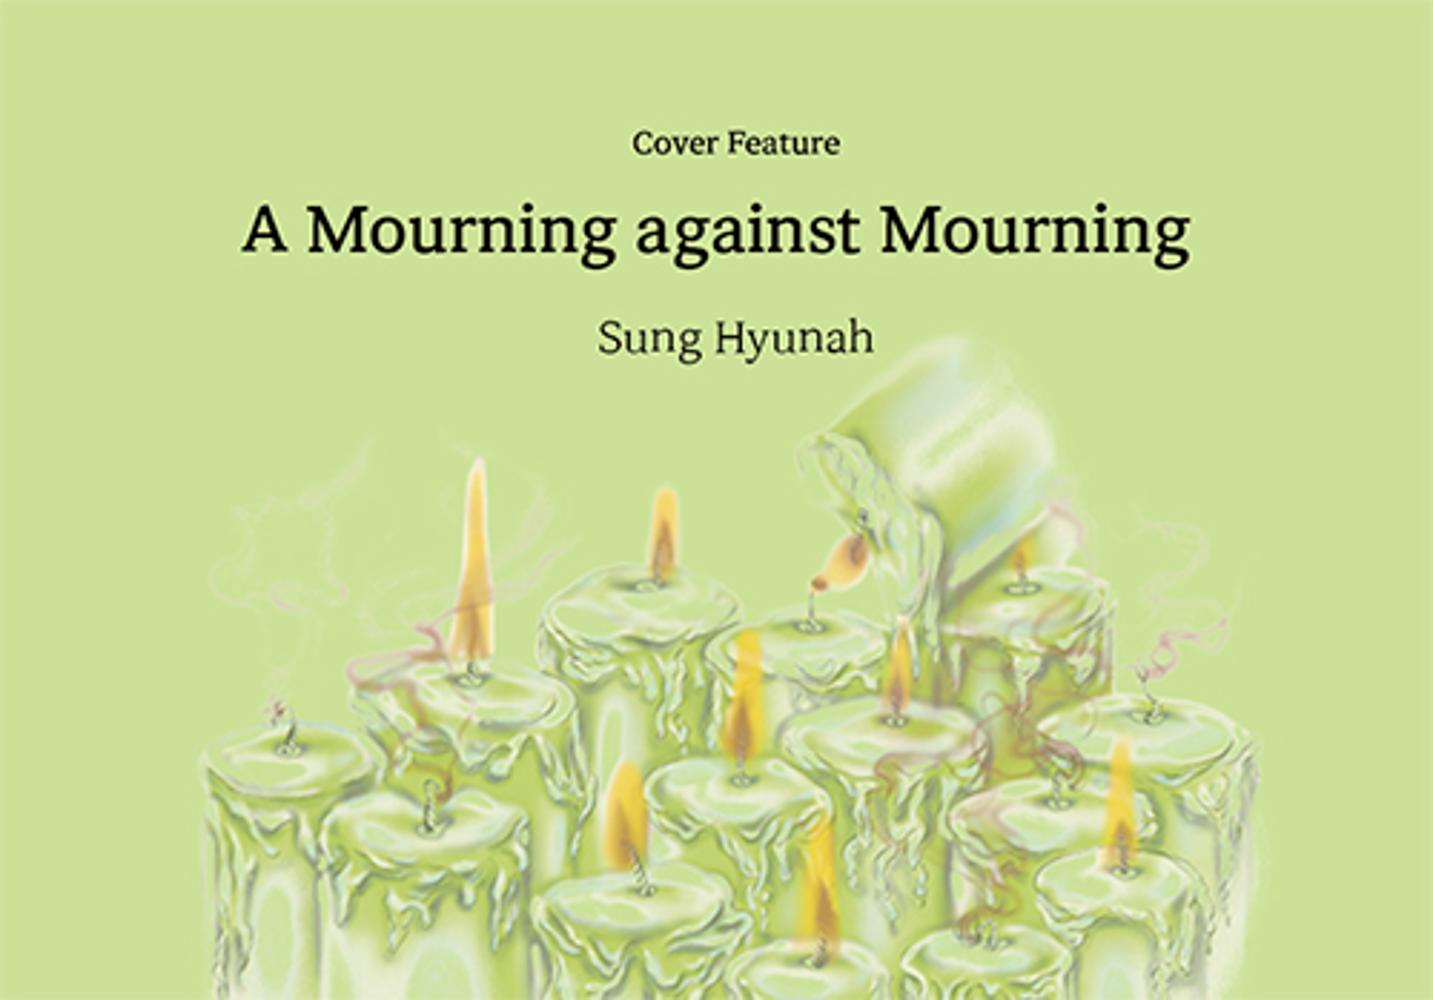 [Cover Feature] A Mourning against Mourning